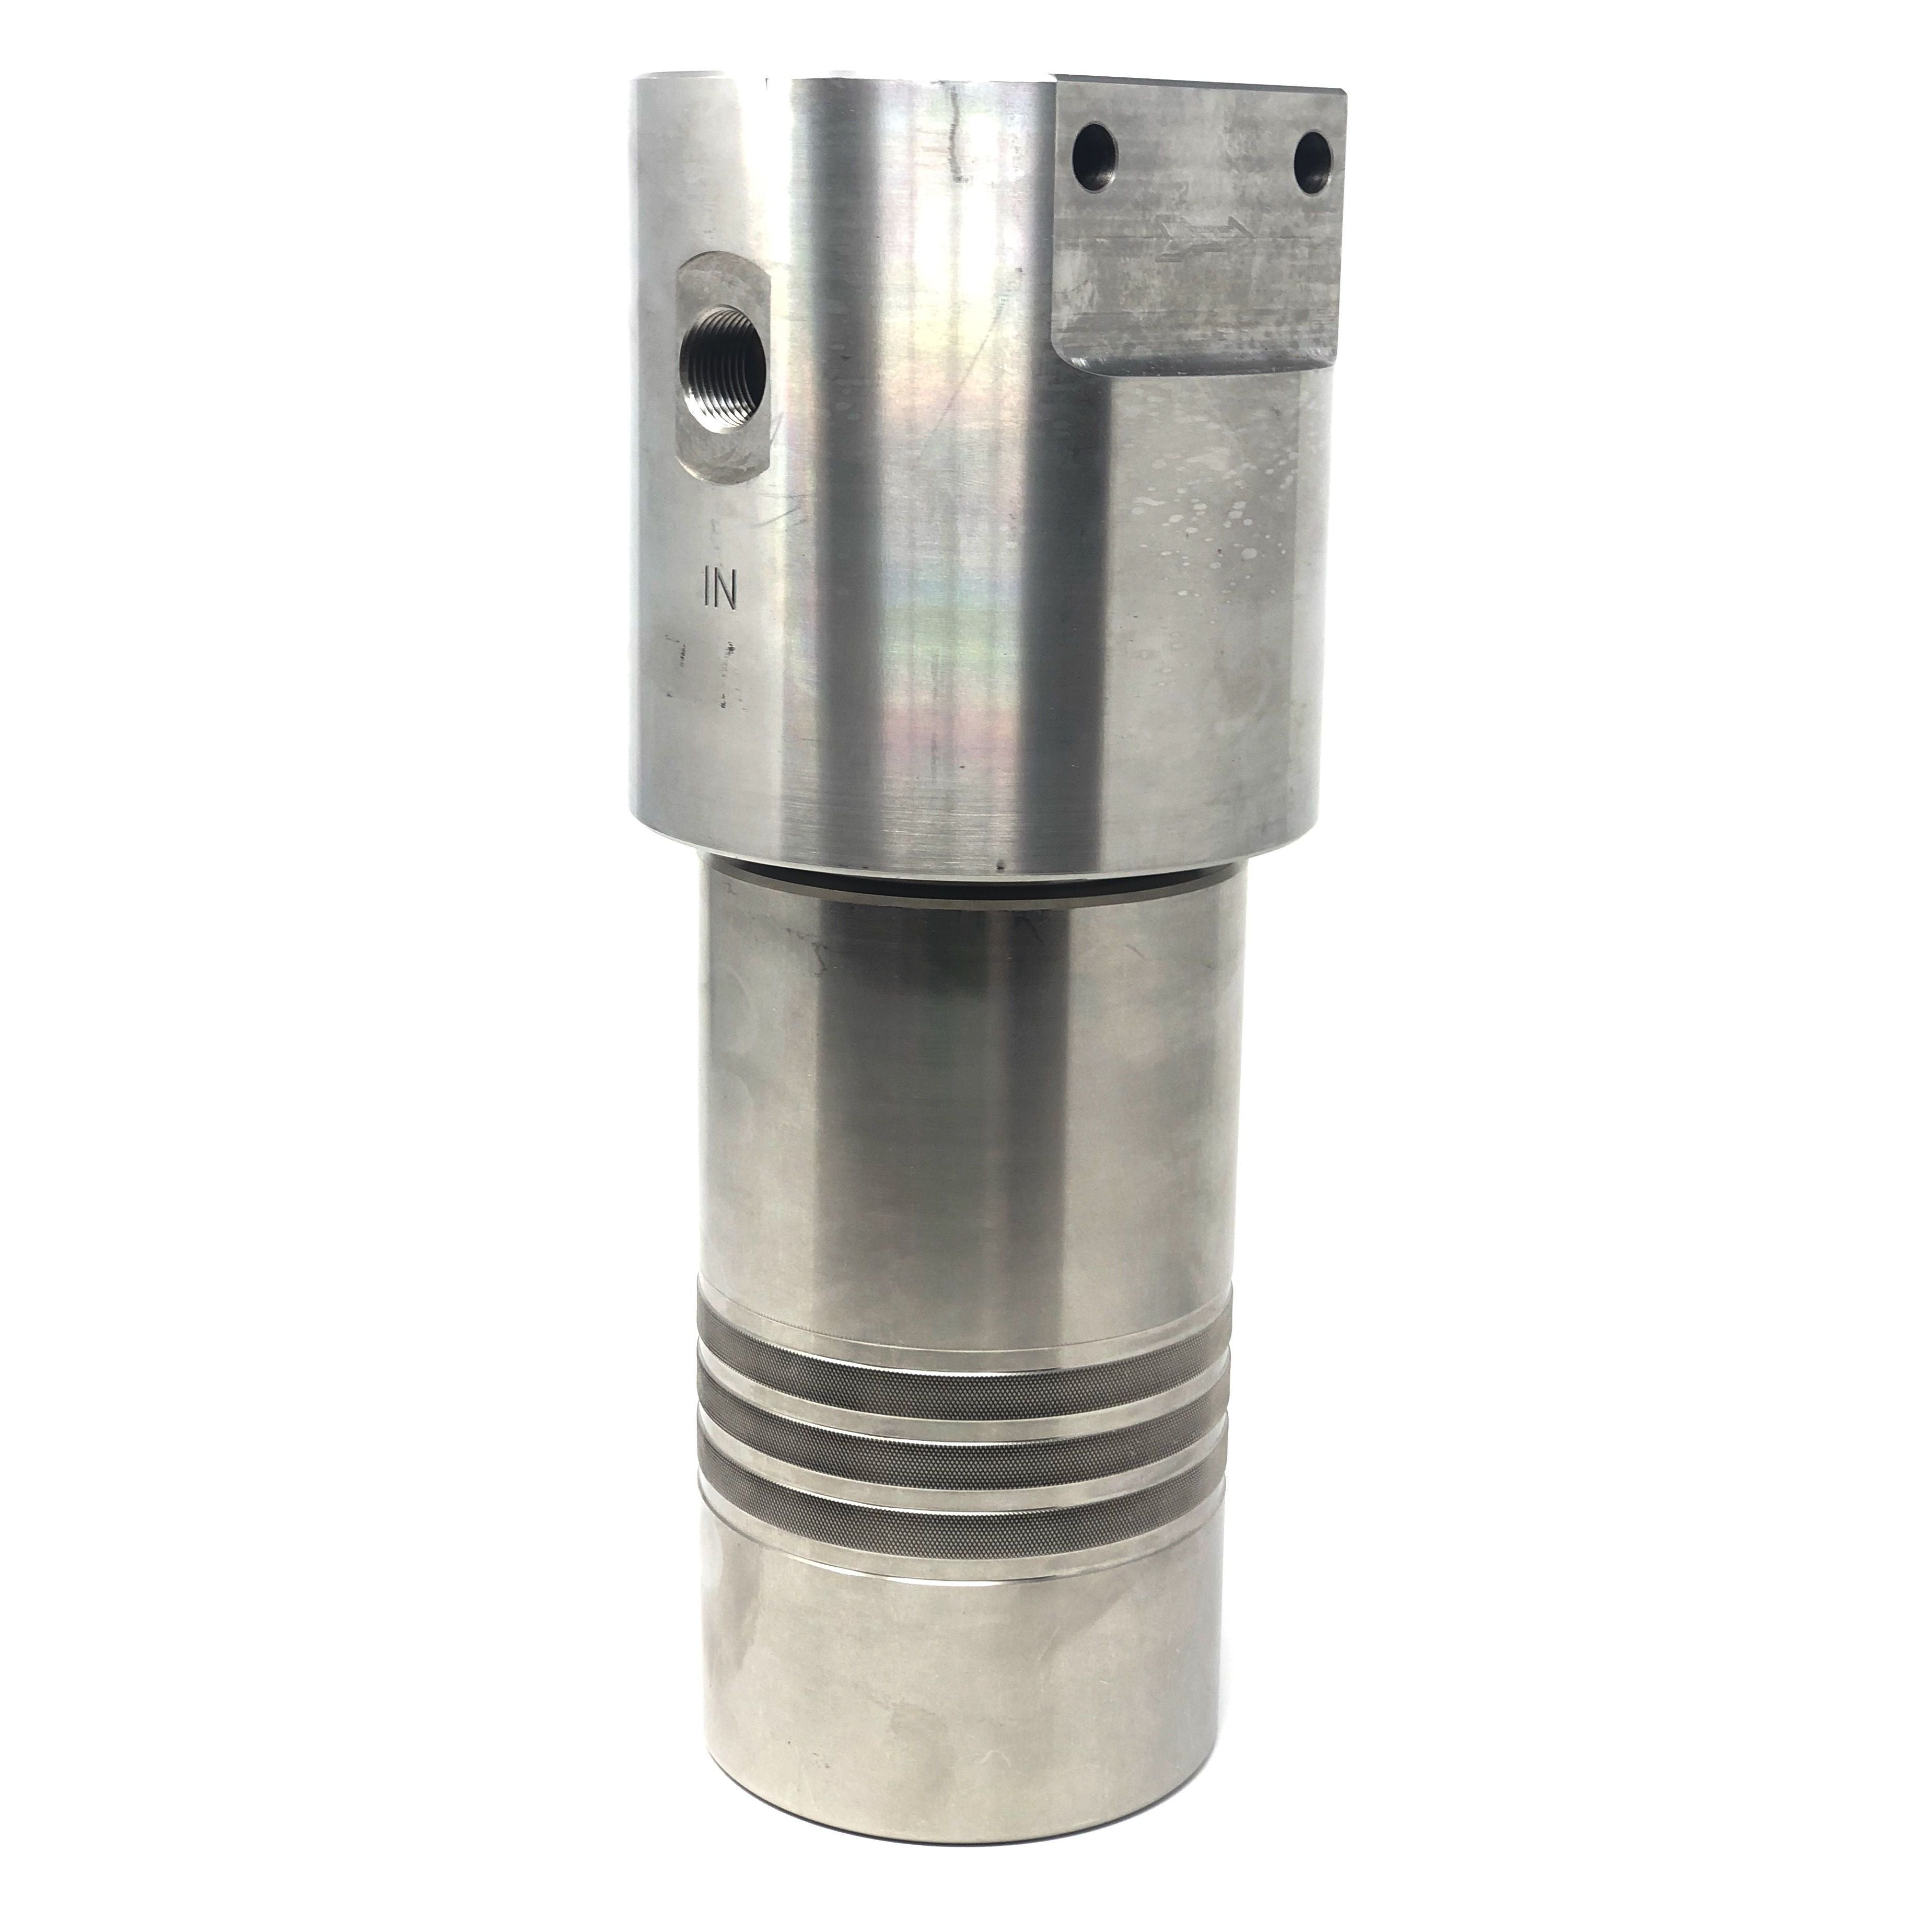 52S-248N-3MDN : Chase Ultra High Pressure Inline Filter, 10000psi, 1/2" NPT, 3 Micron, With Visual Indicator, No Bypass